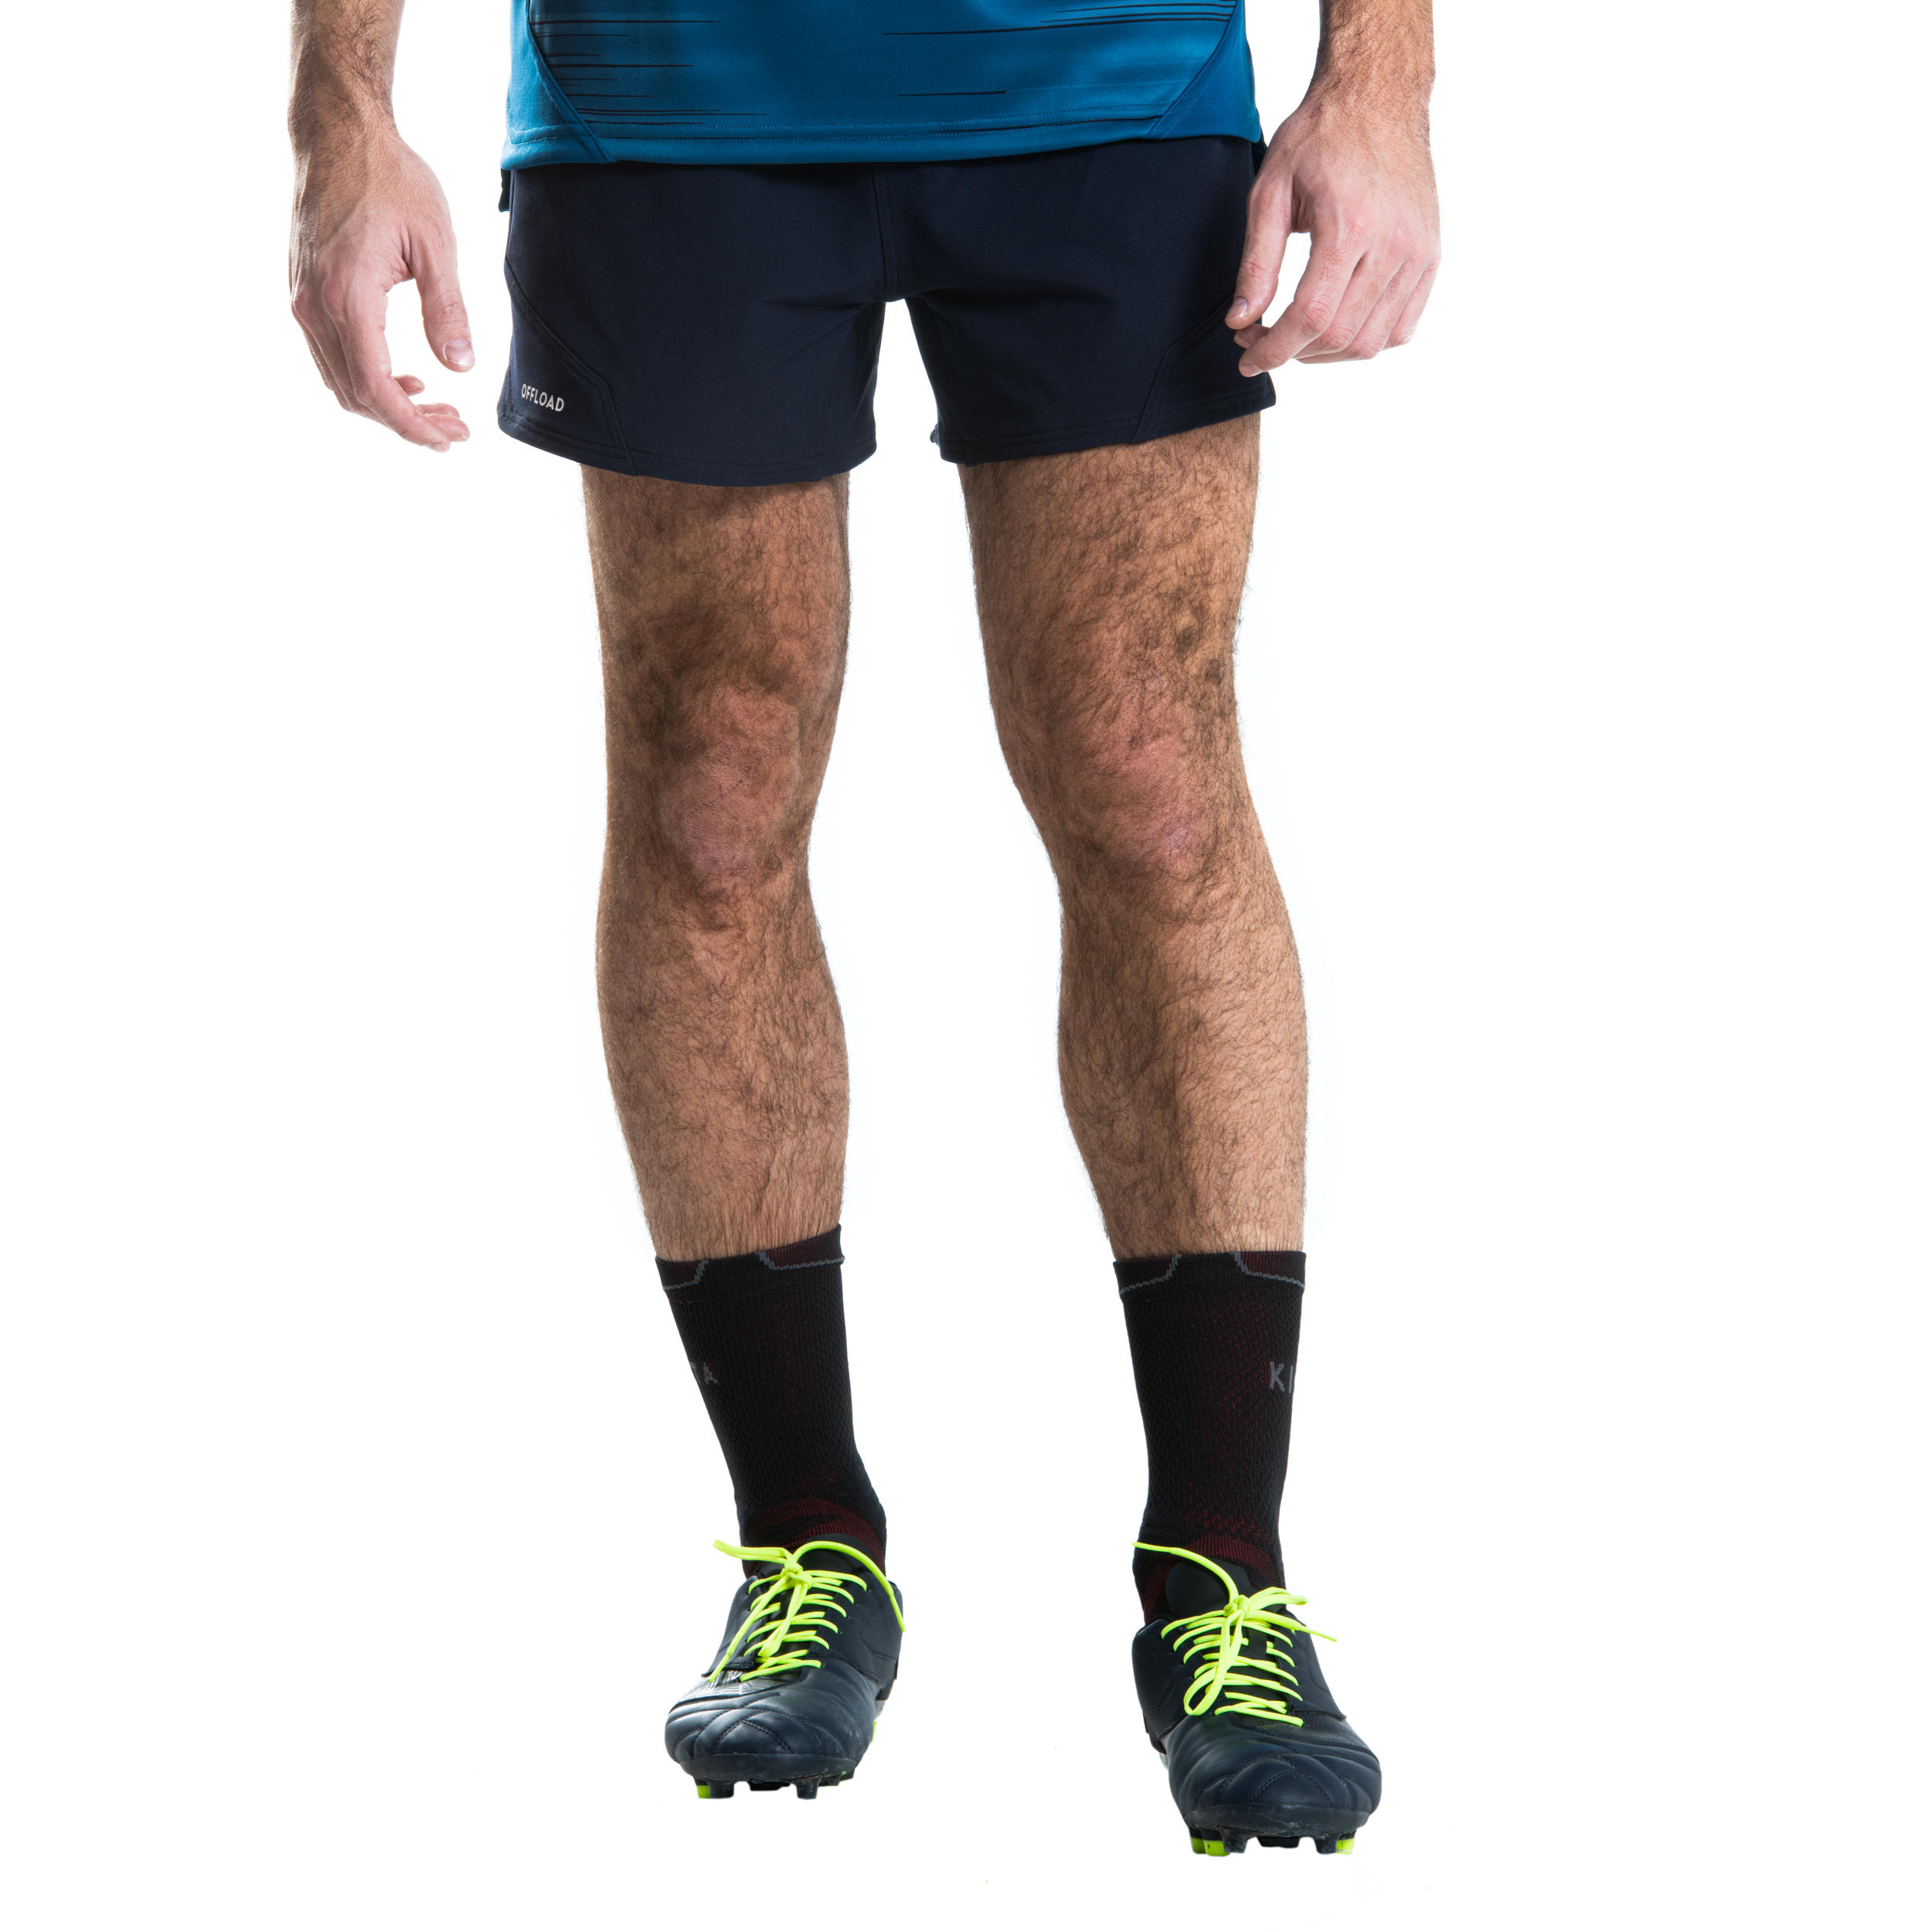 Men's Rugby Shorts R500 - Navy Blue 5/8